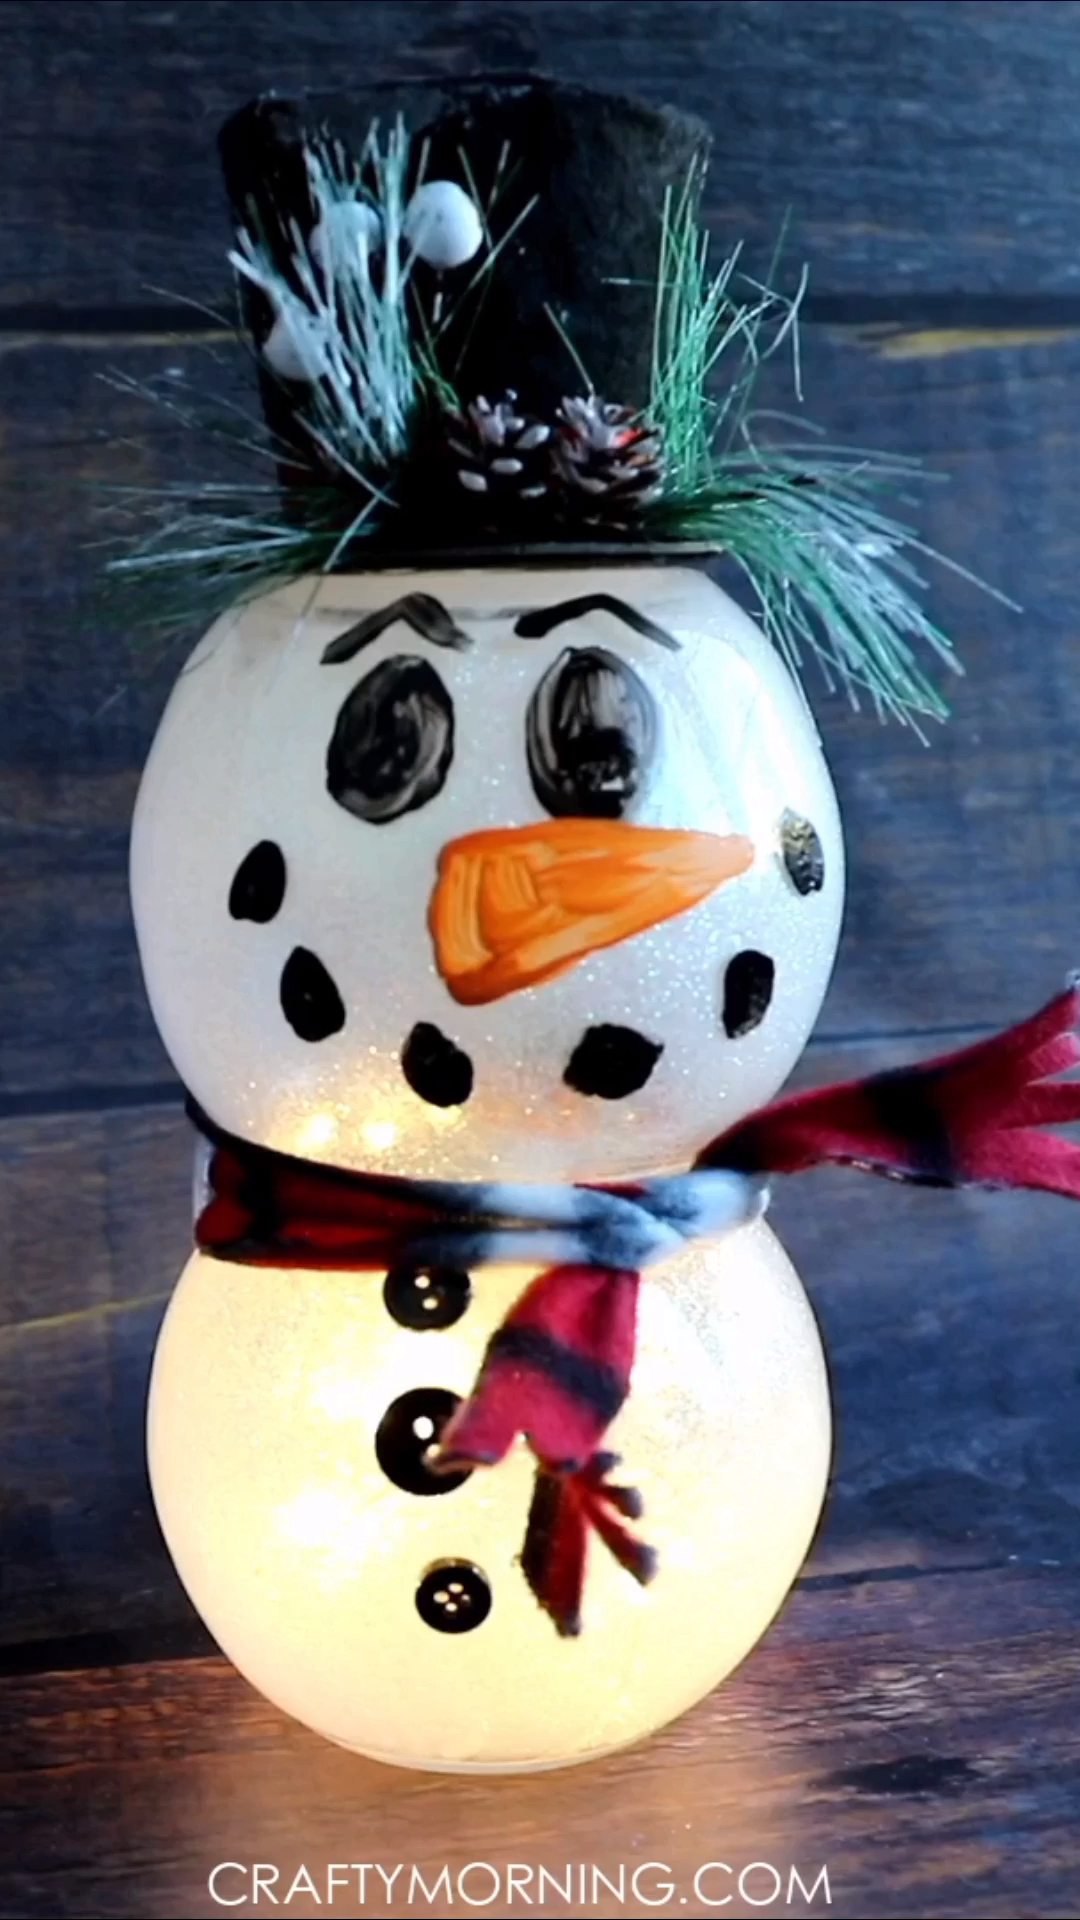 15 diy christmas decorations dollar store for kids ideas